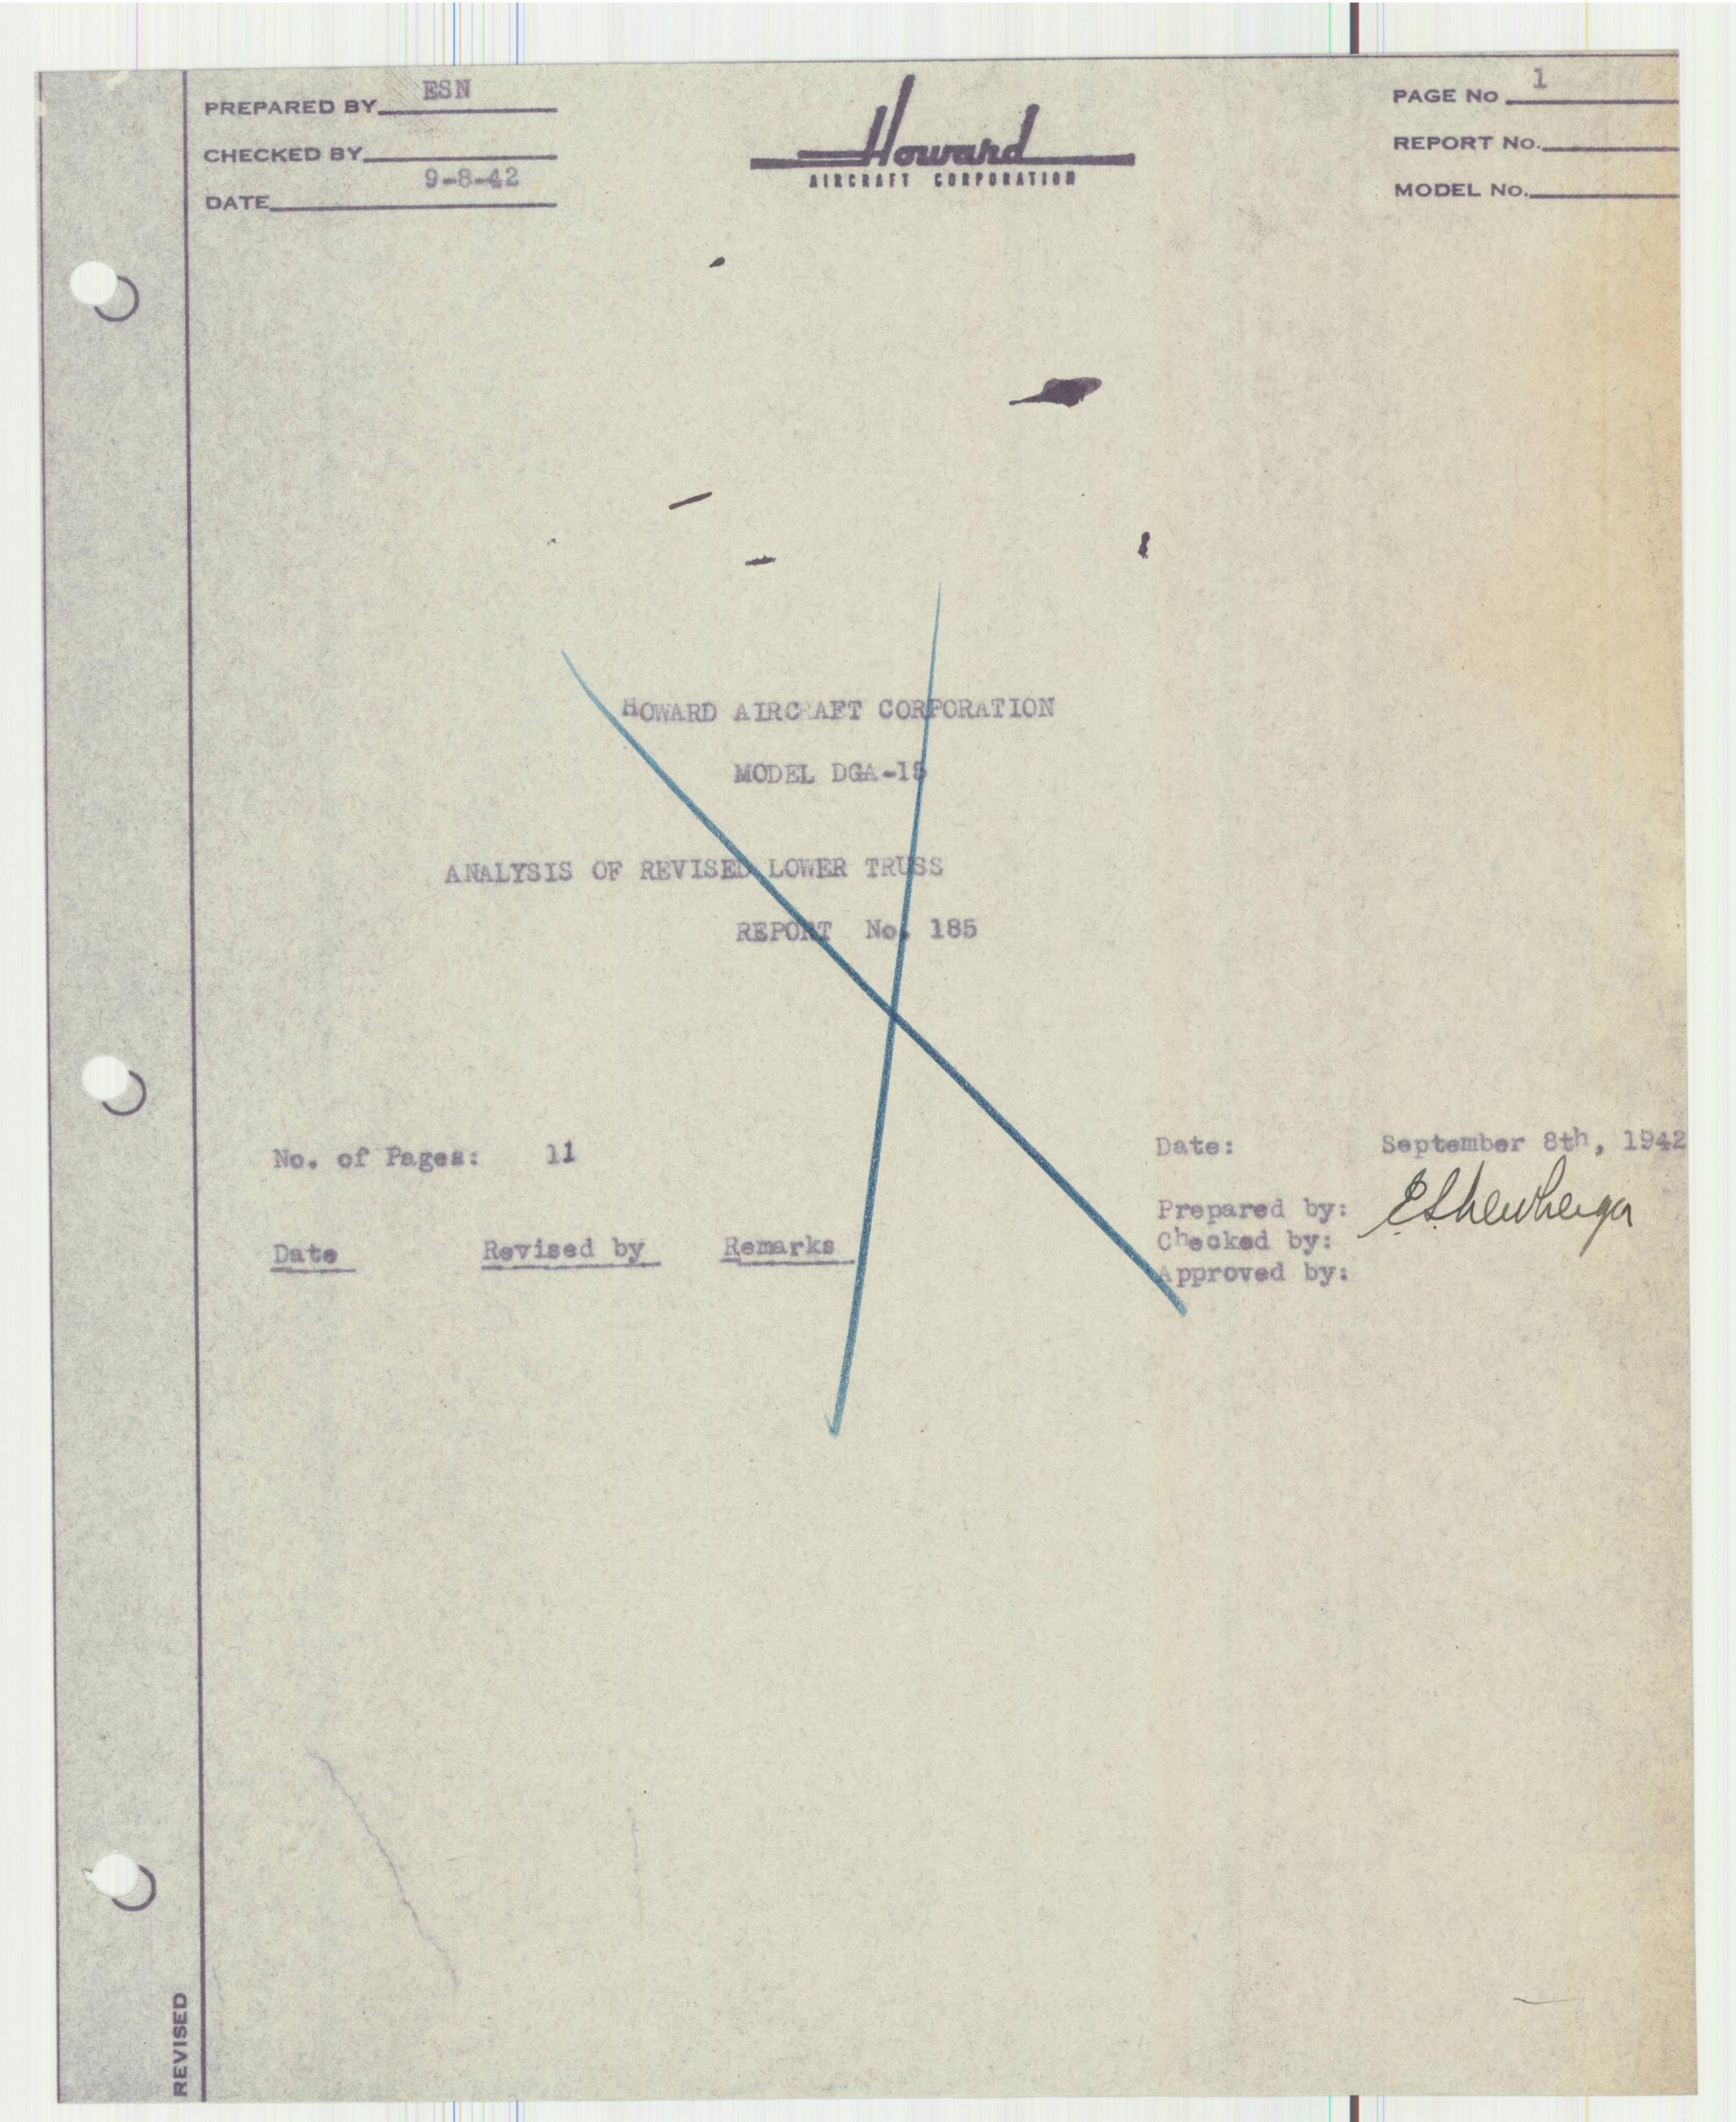 Sample page 3 from AirCorps Library document: Report 185, Analysis of Revised Lower Truss, DGA-15